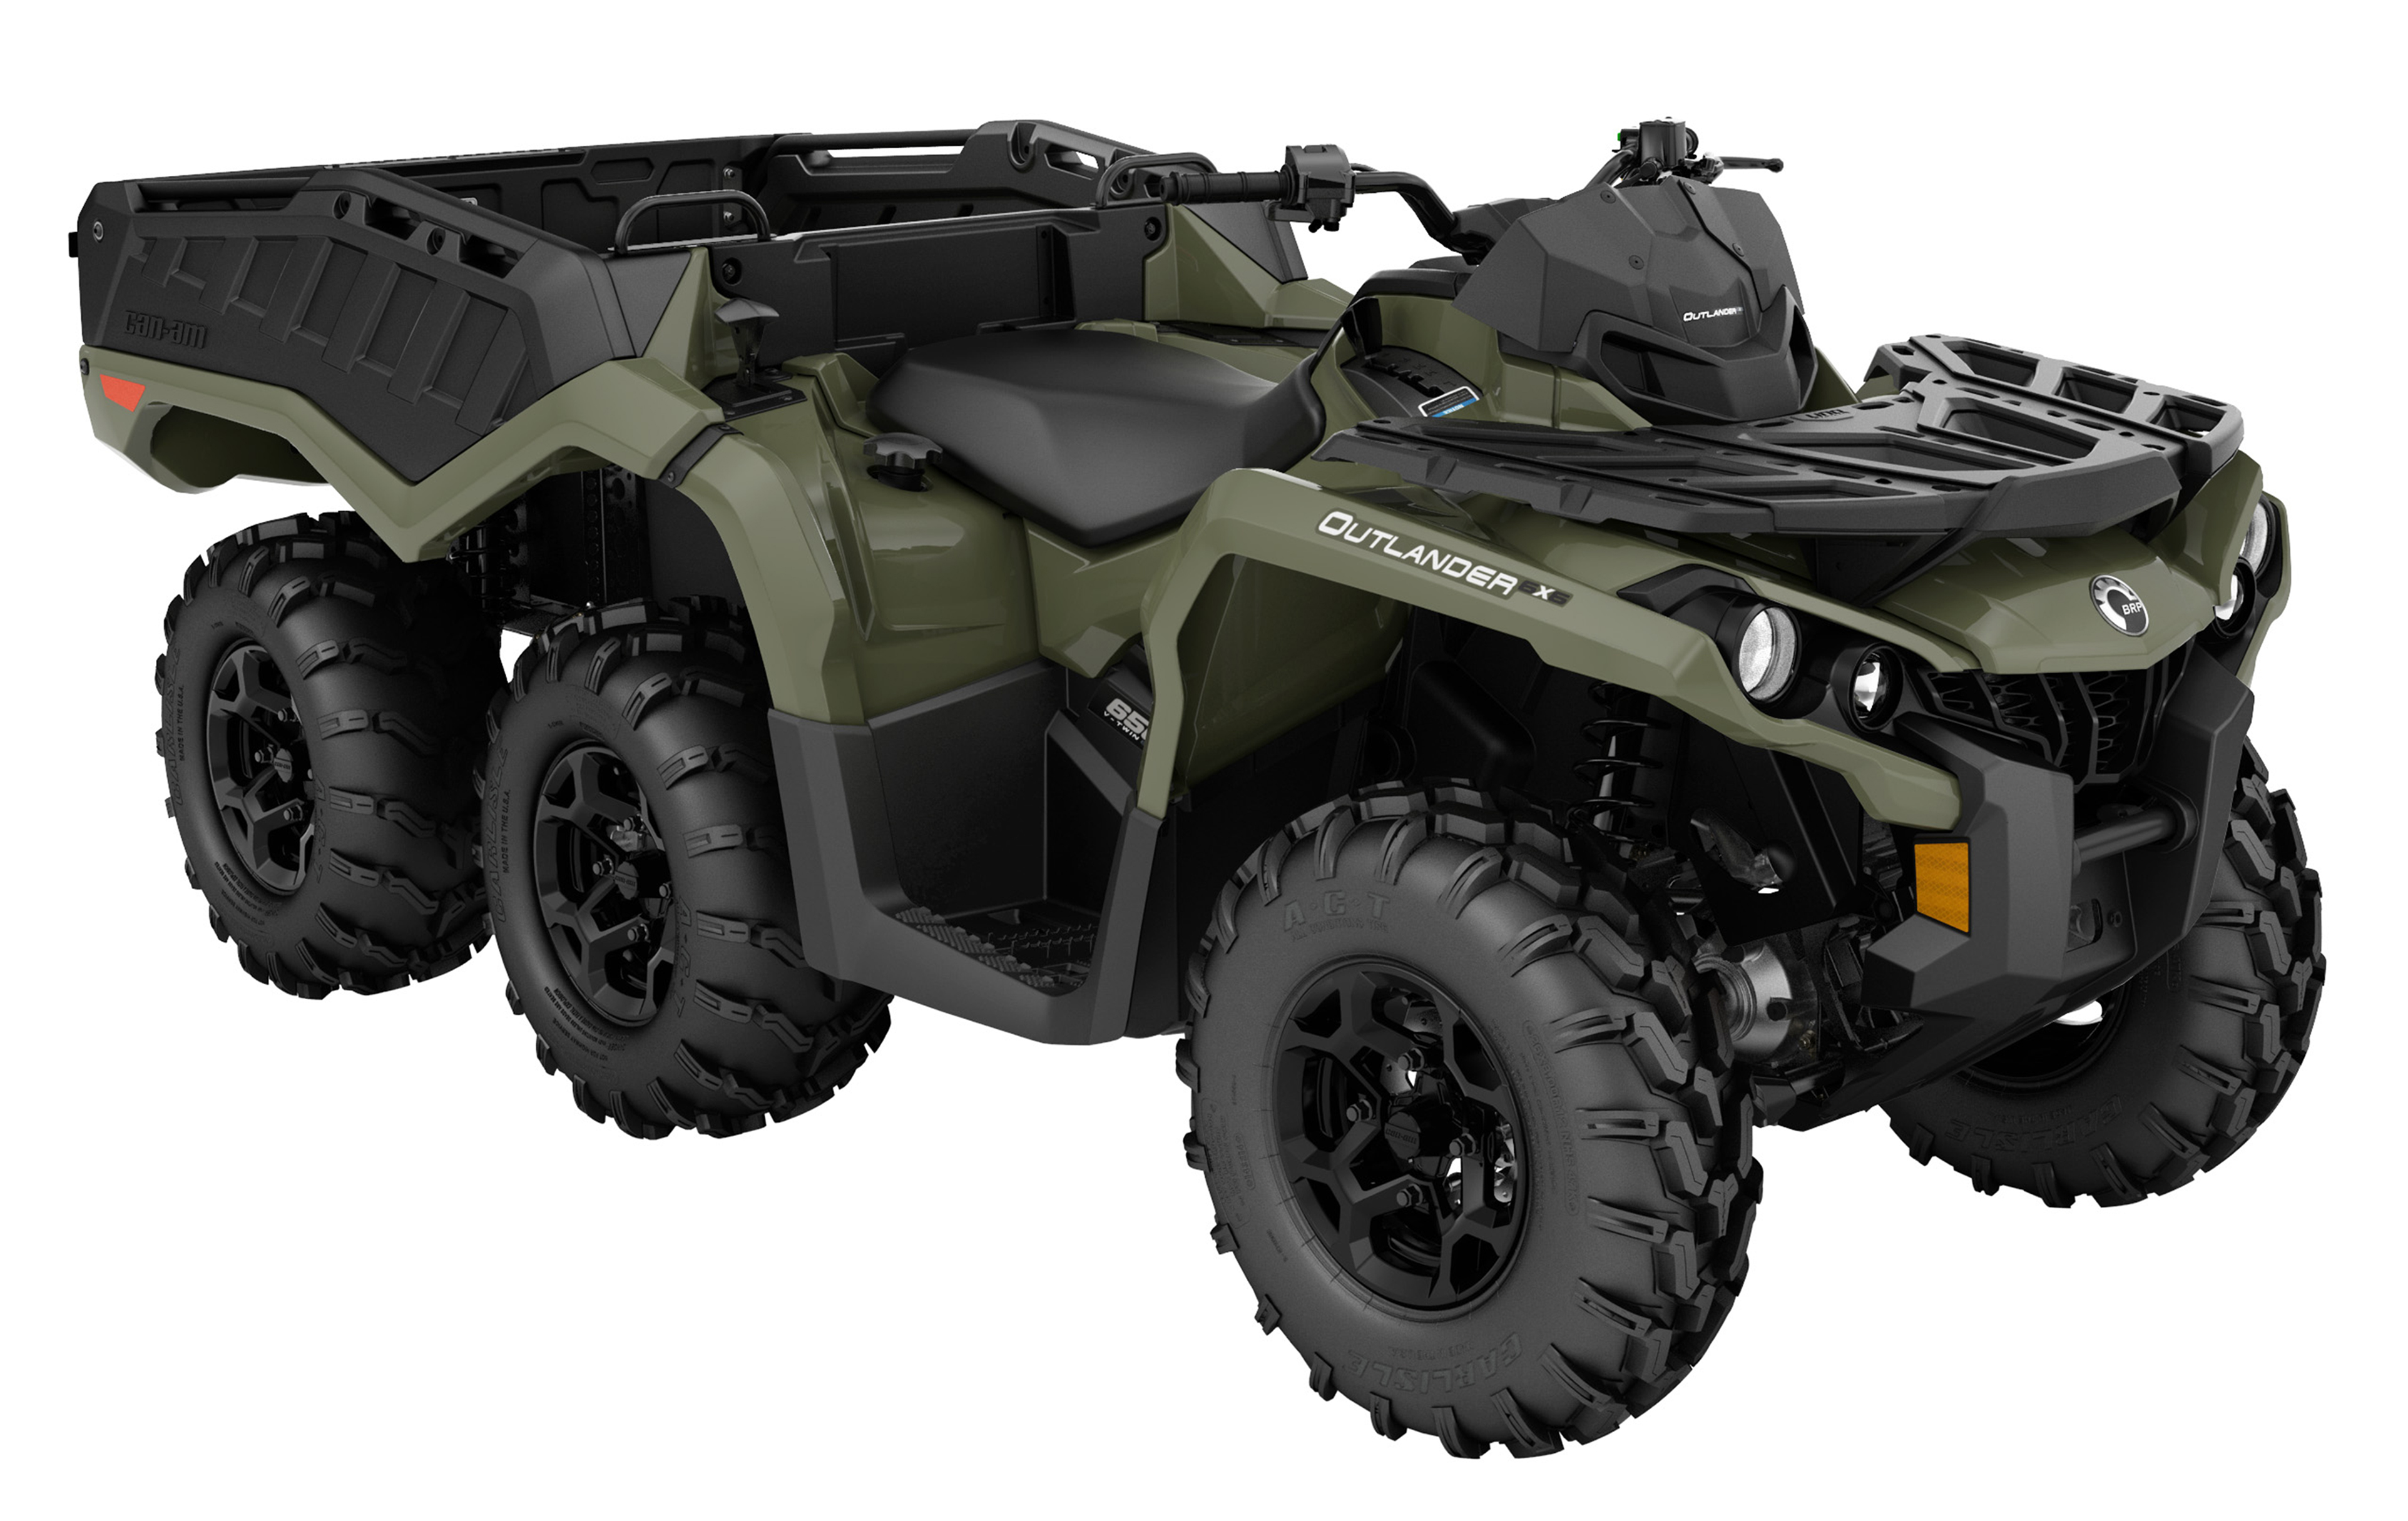 2018 Can-Am Outlander and Renegade all-terrain vehicles (ATVs)